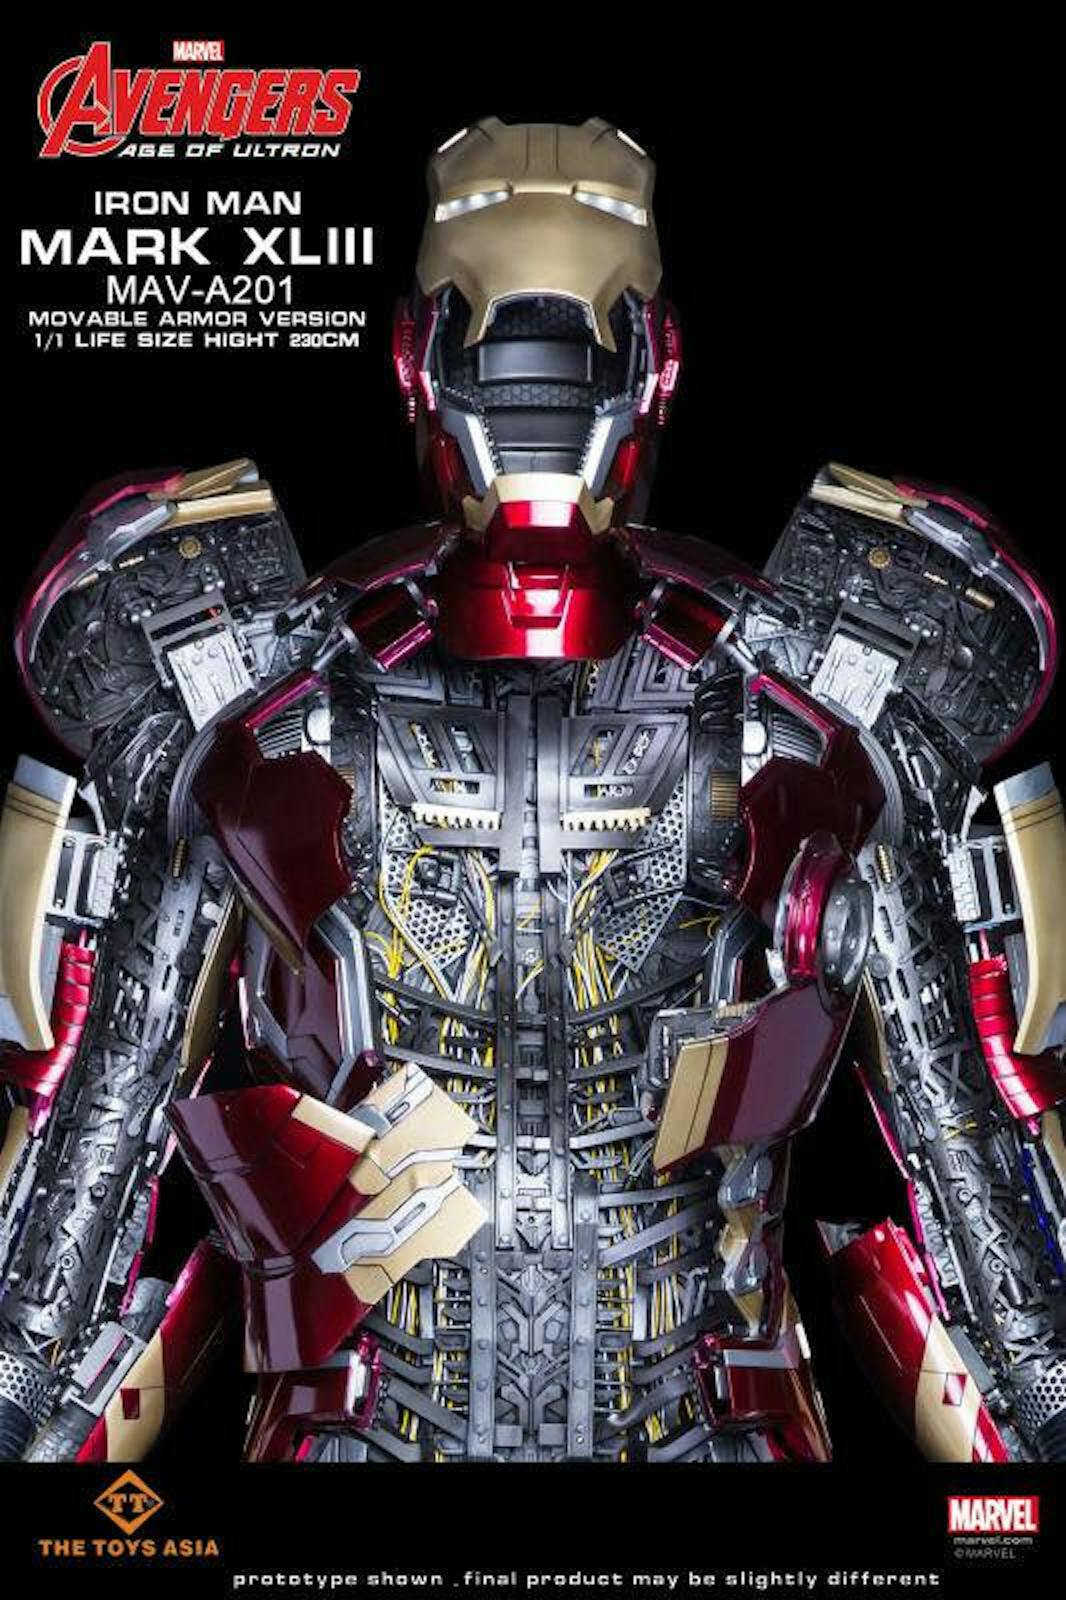 life-sized-iron-man-suit-has-46-motors-and-costs-365-000-inverse